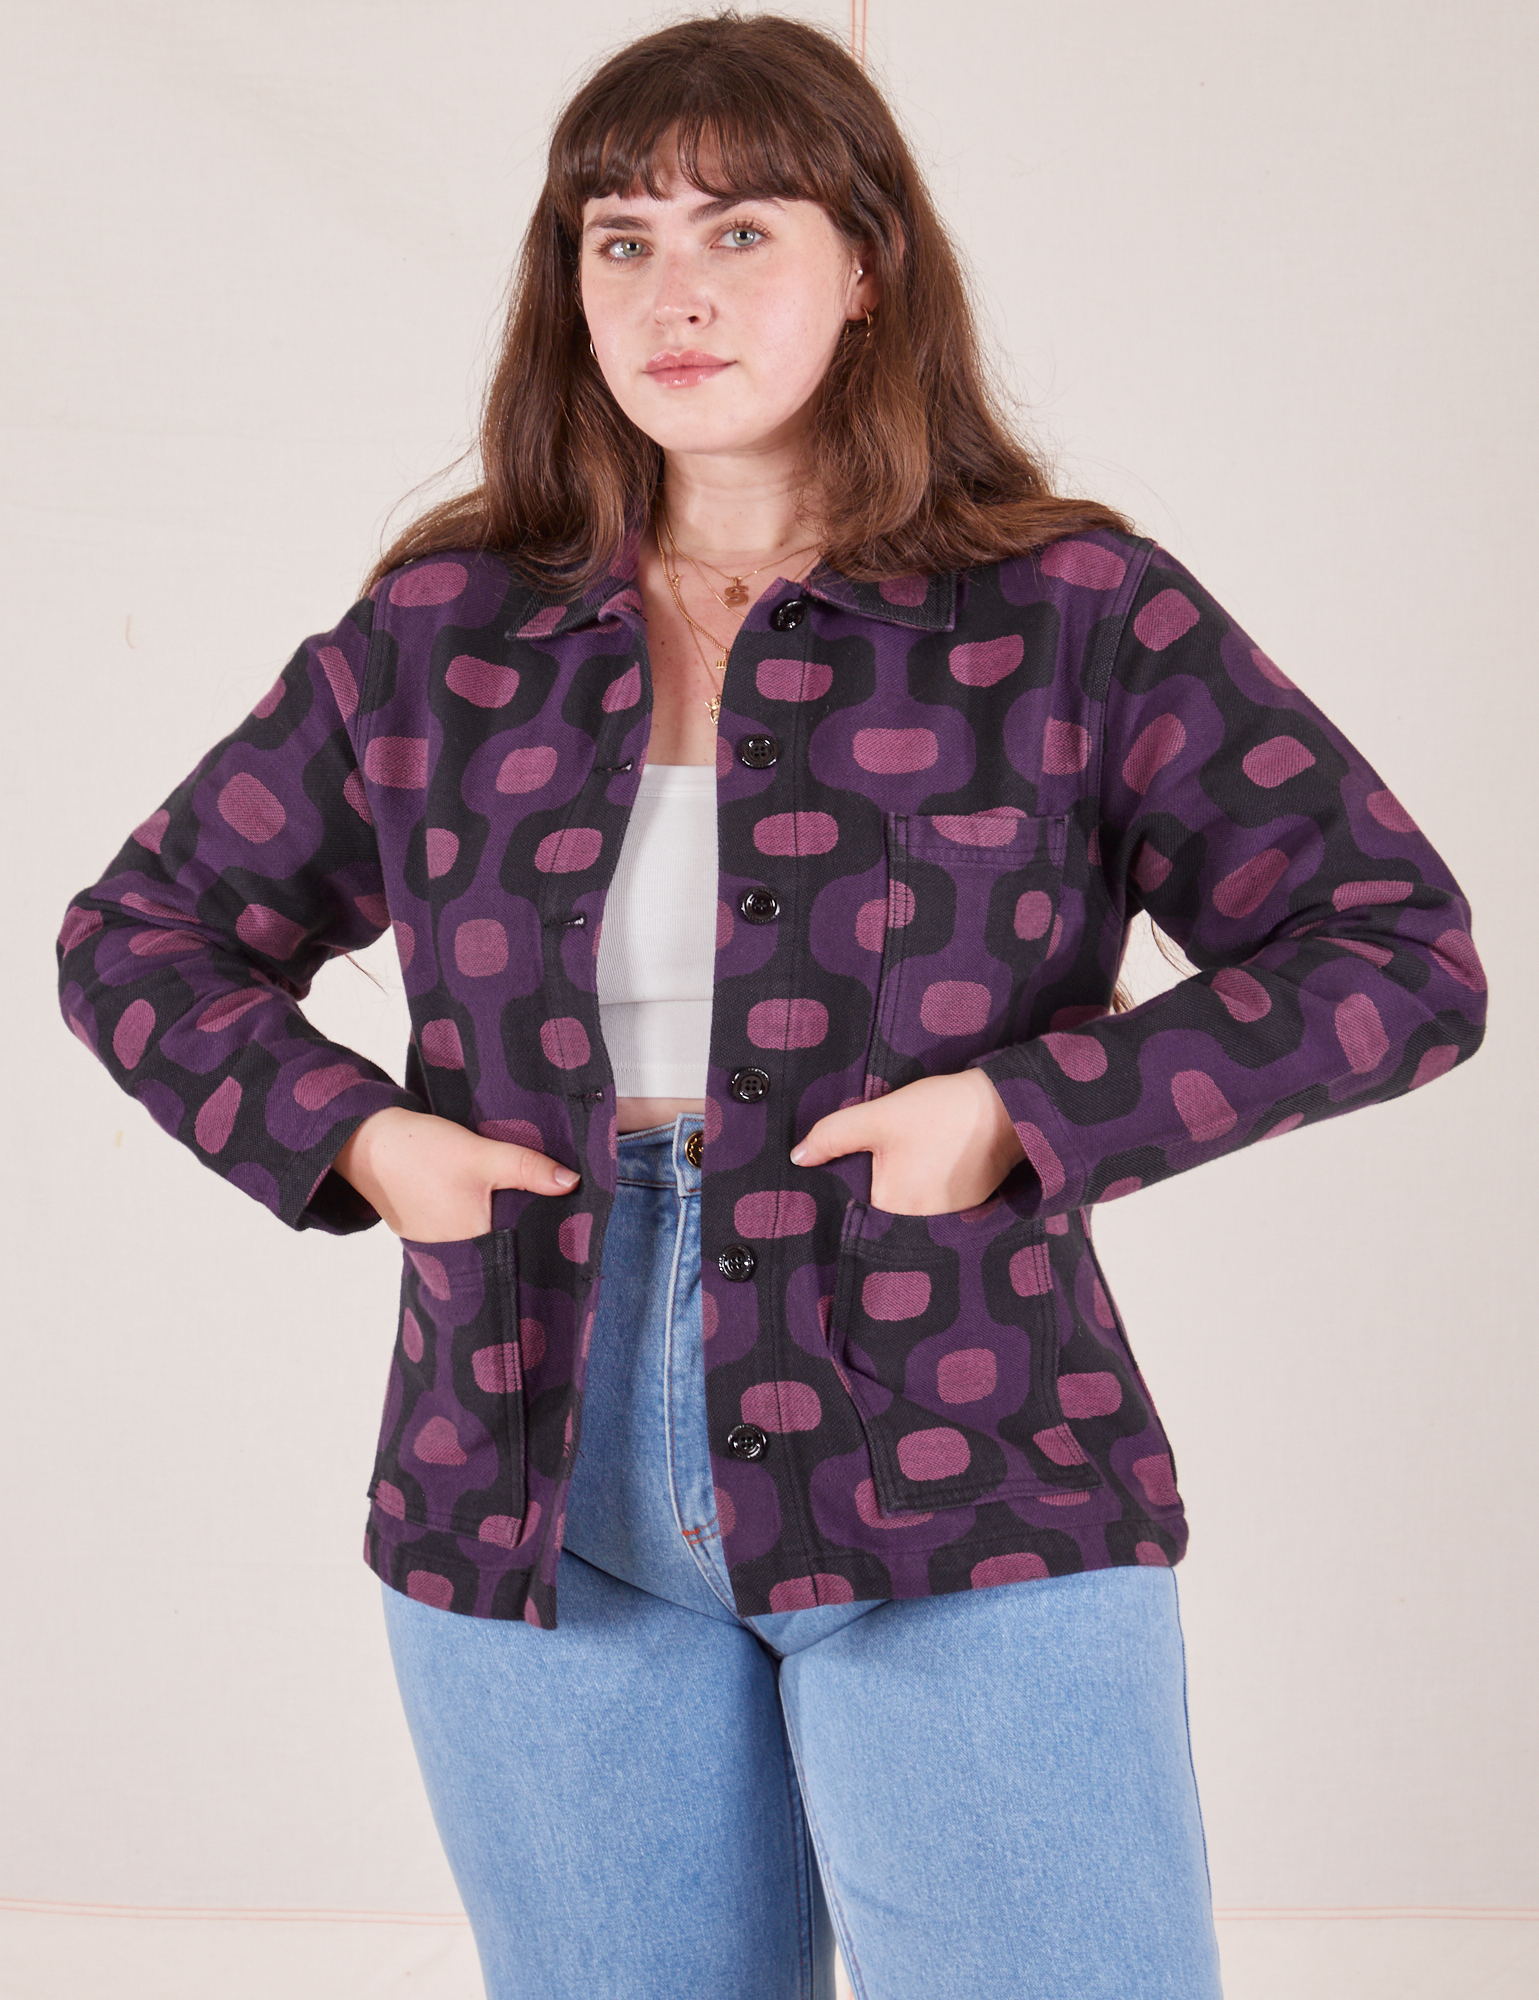 Sydney is 5&#39;9&quot; and wearing XS  Purple Tile Jacquard Work Jacket